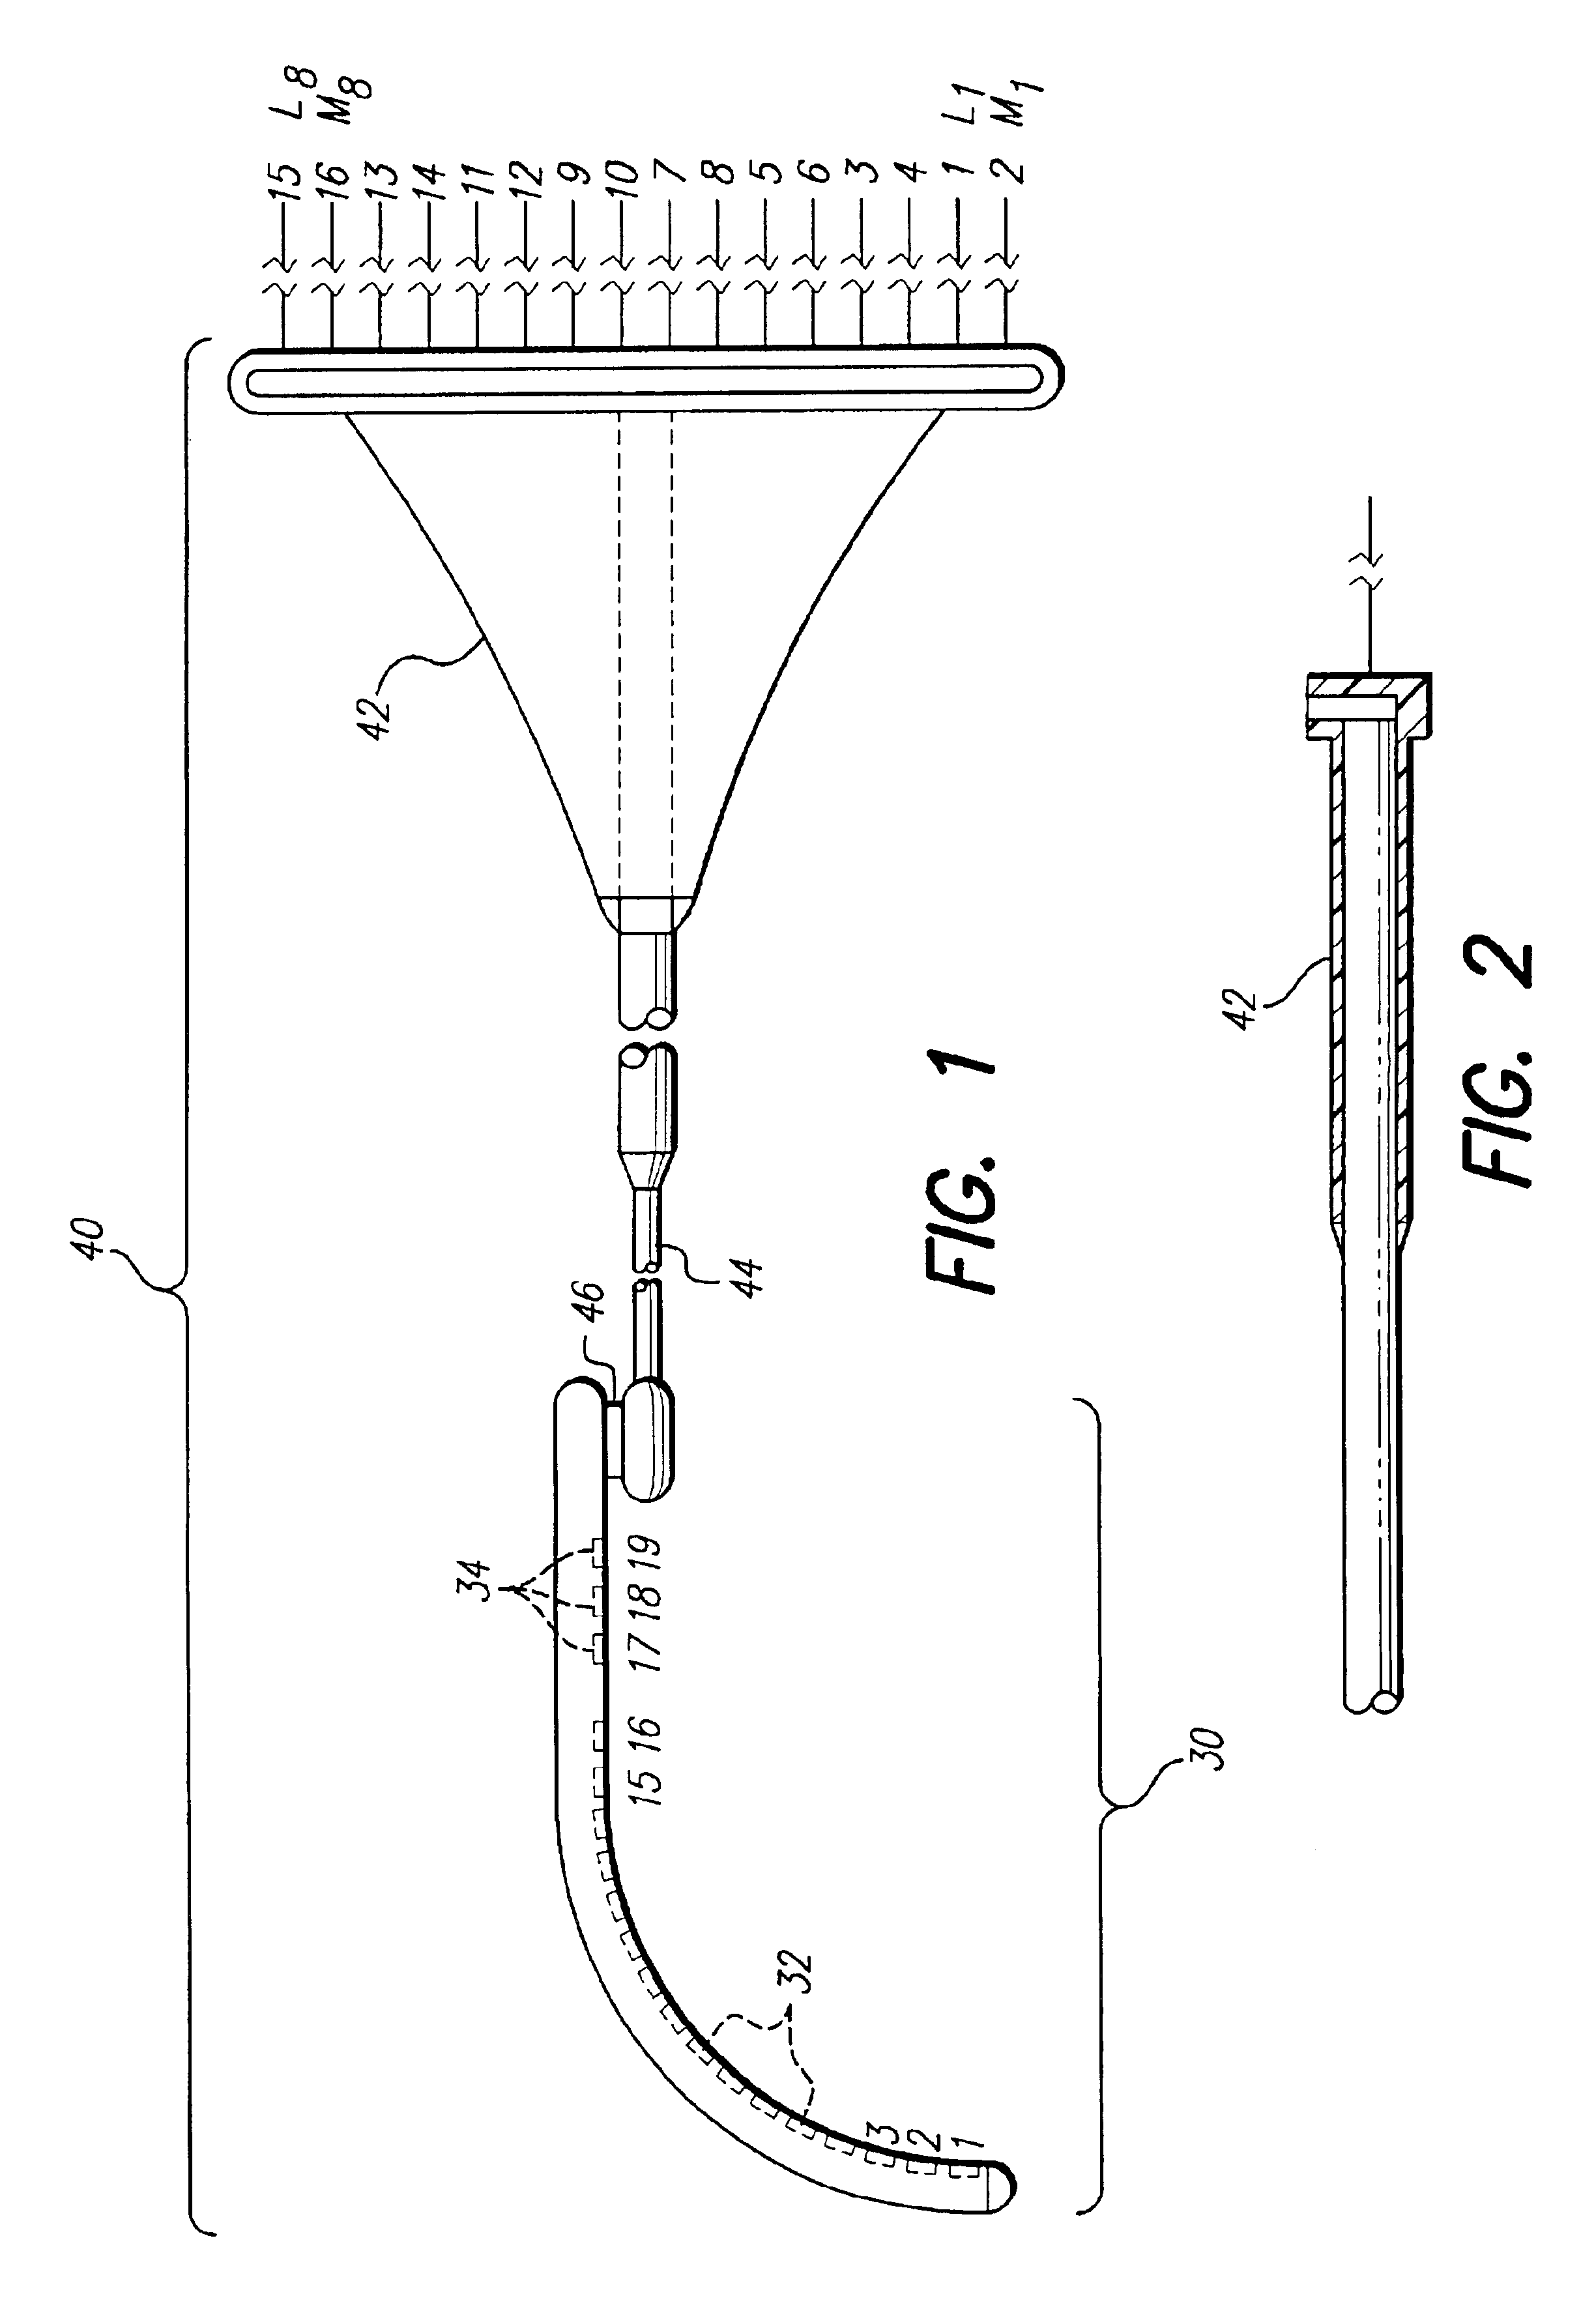 Method of making a cochlear electrode array having current-focusing and tissue-treating features